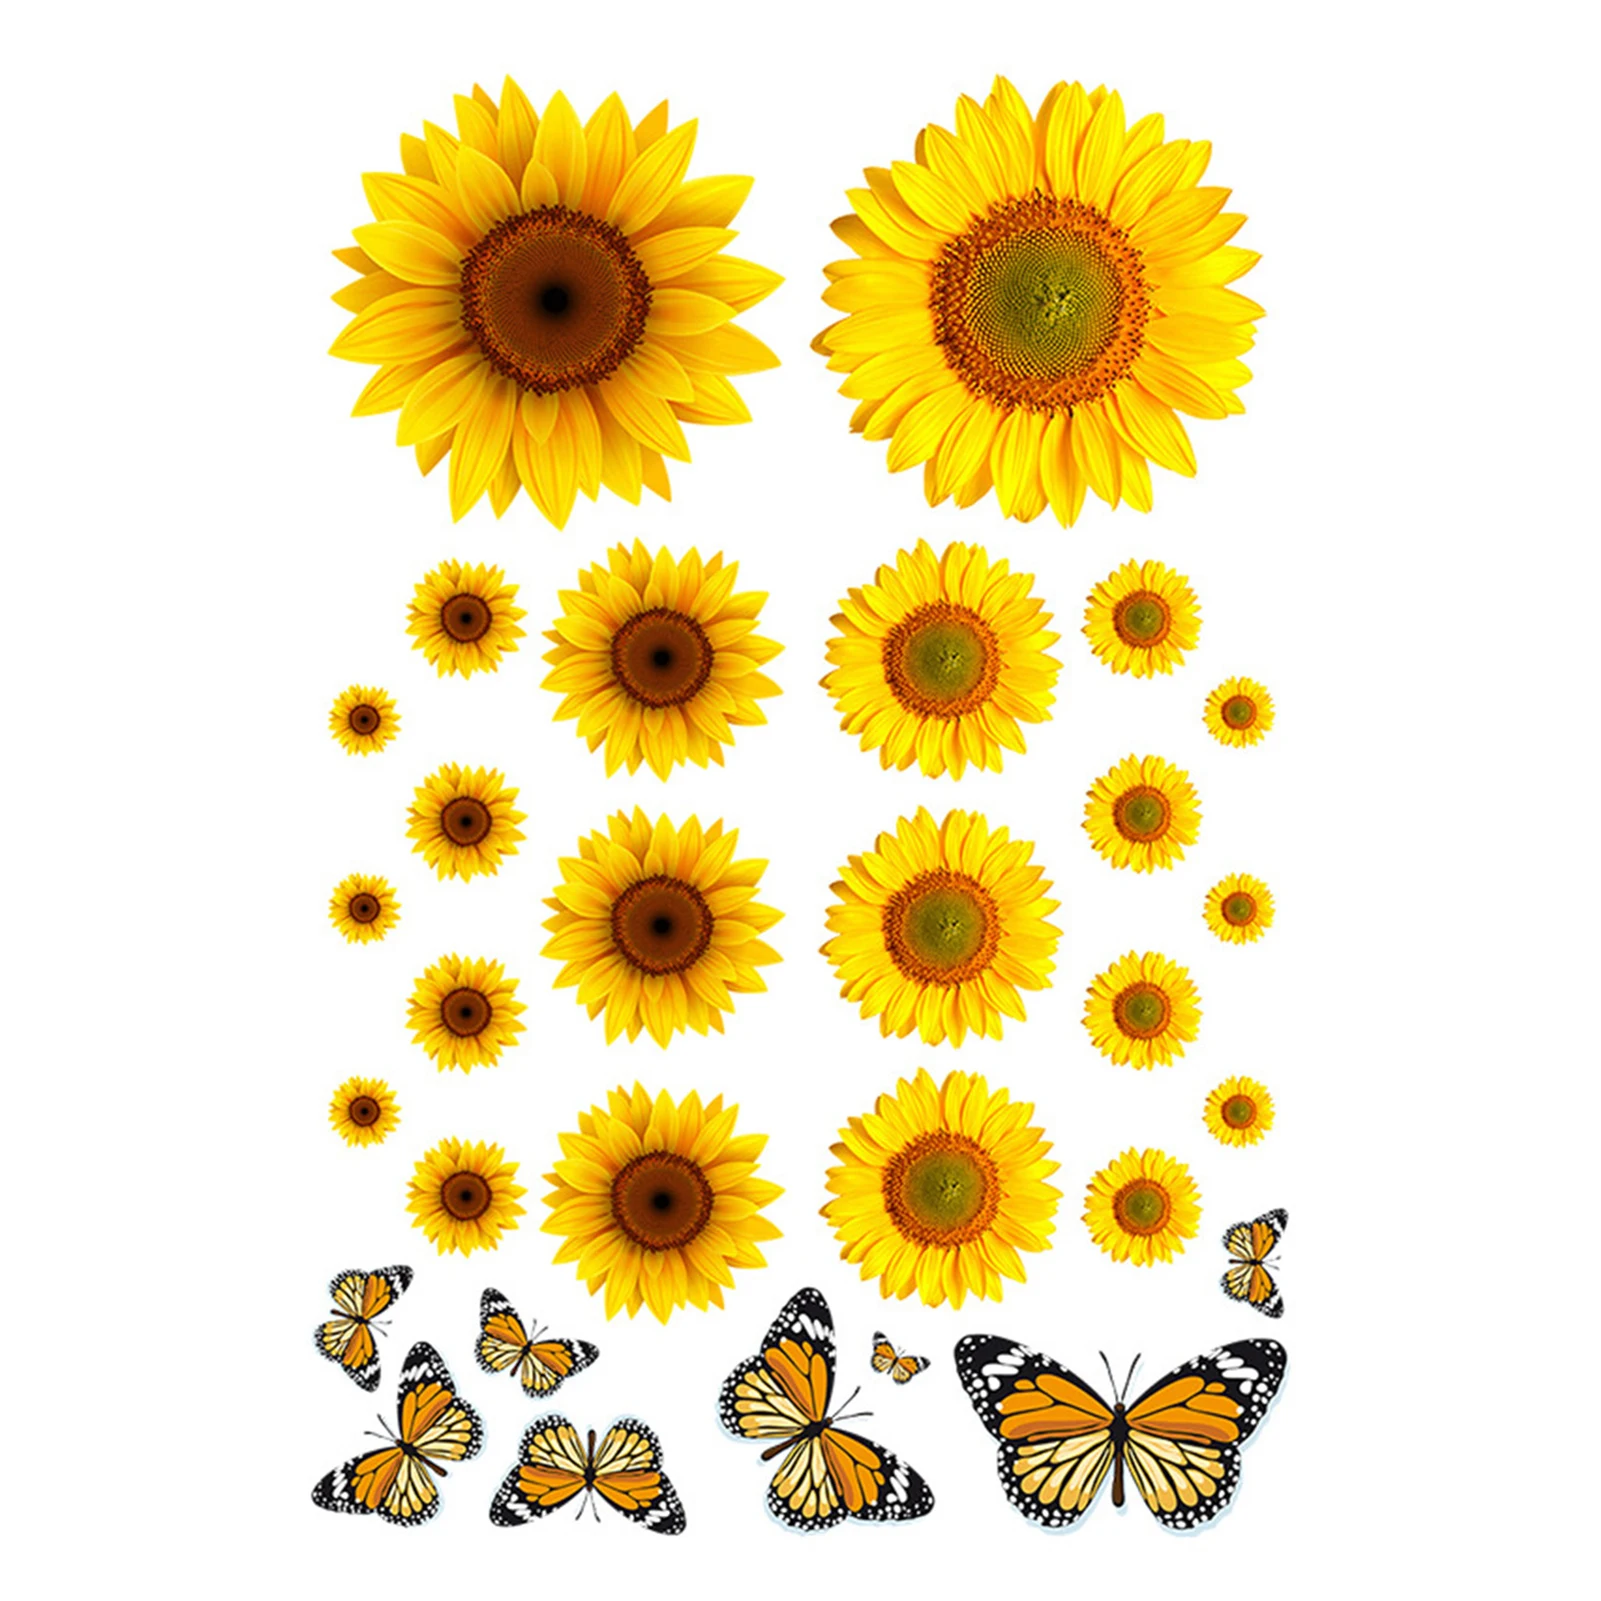 Wall Stickers Set 3D Sunflowers With Butterfly Removable Decal Wall Stickers For Kids Baby Room Bedroom Ceiling Home Decor butterfly of love removable refrigerator wall stickers